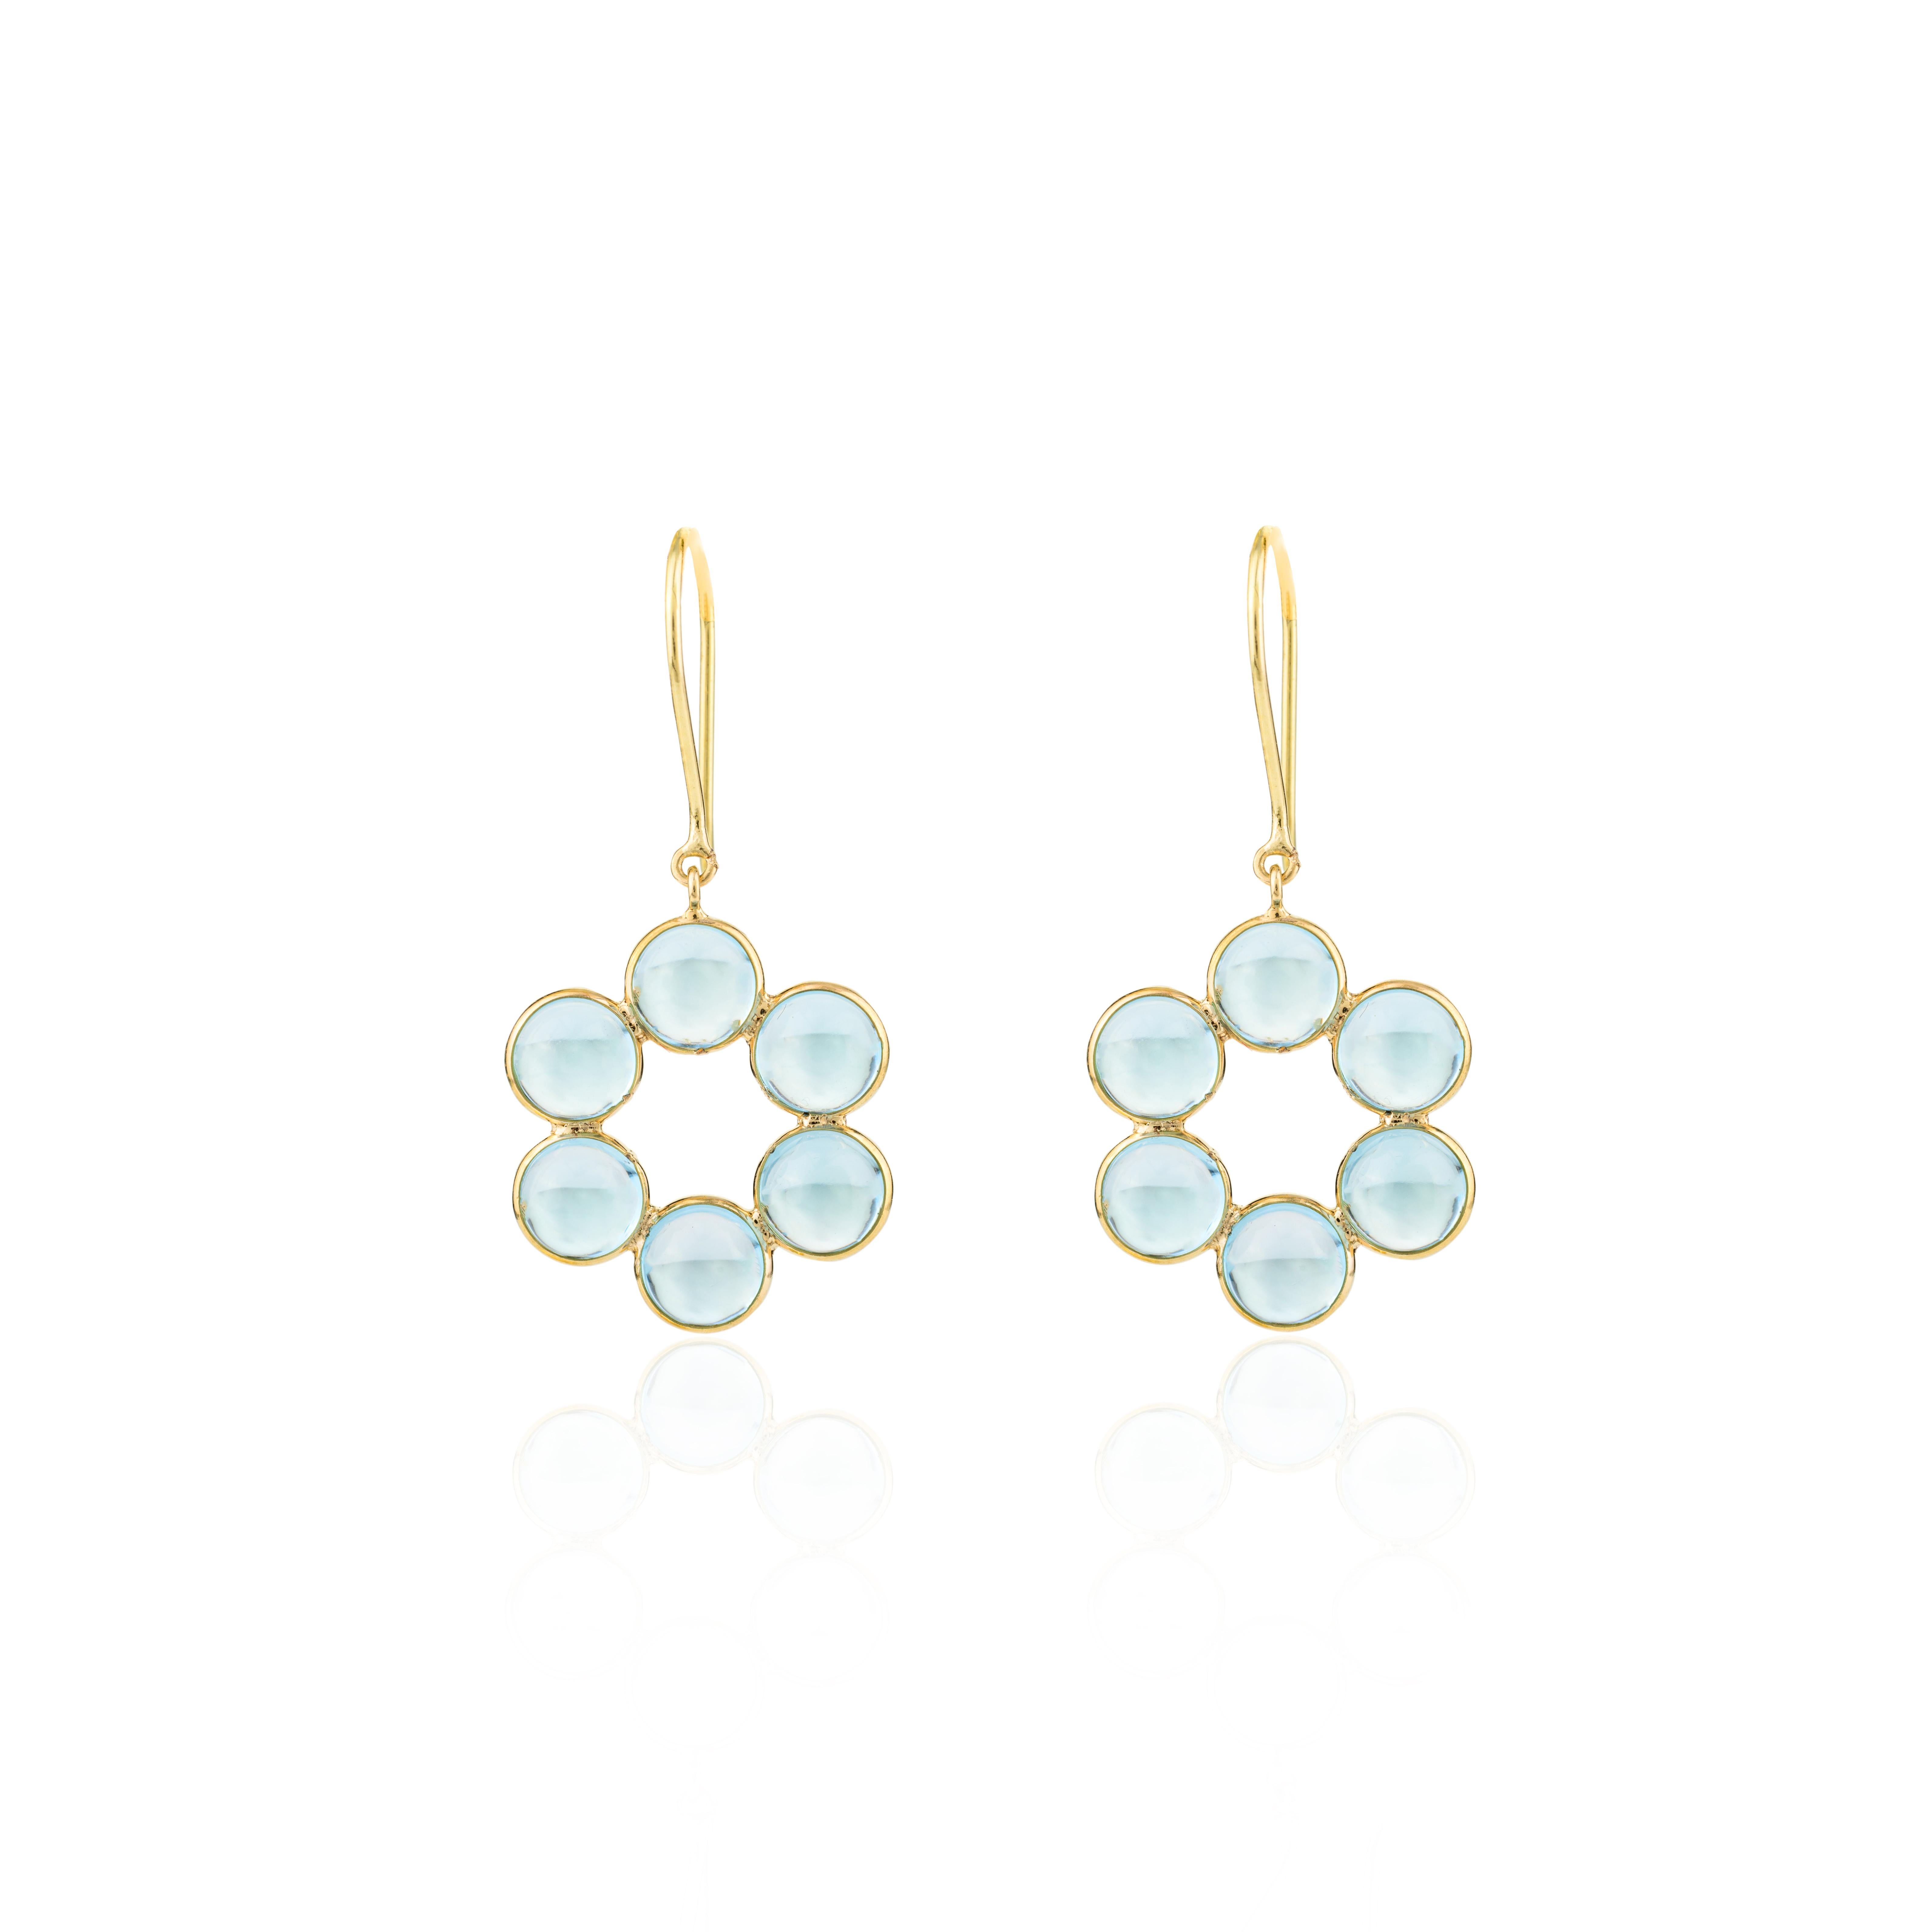 Modern 18k Solid Yellow Gold Round Blue Topaz Flower Drop Earrings Gift for Her For Sale